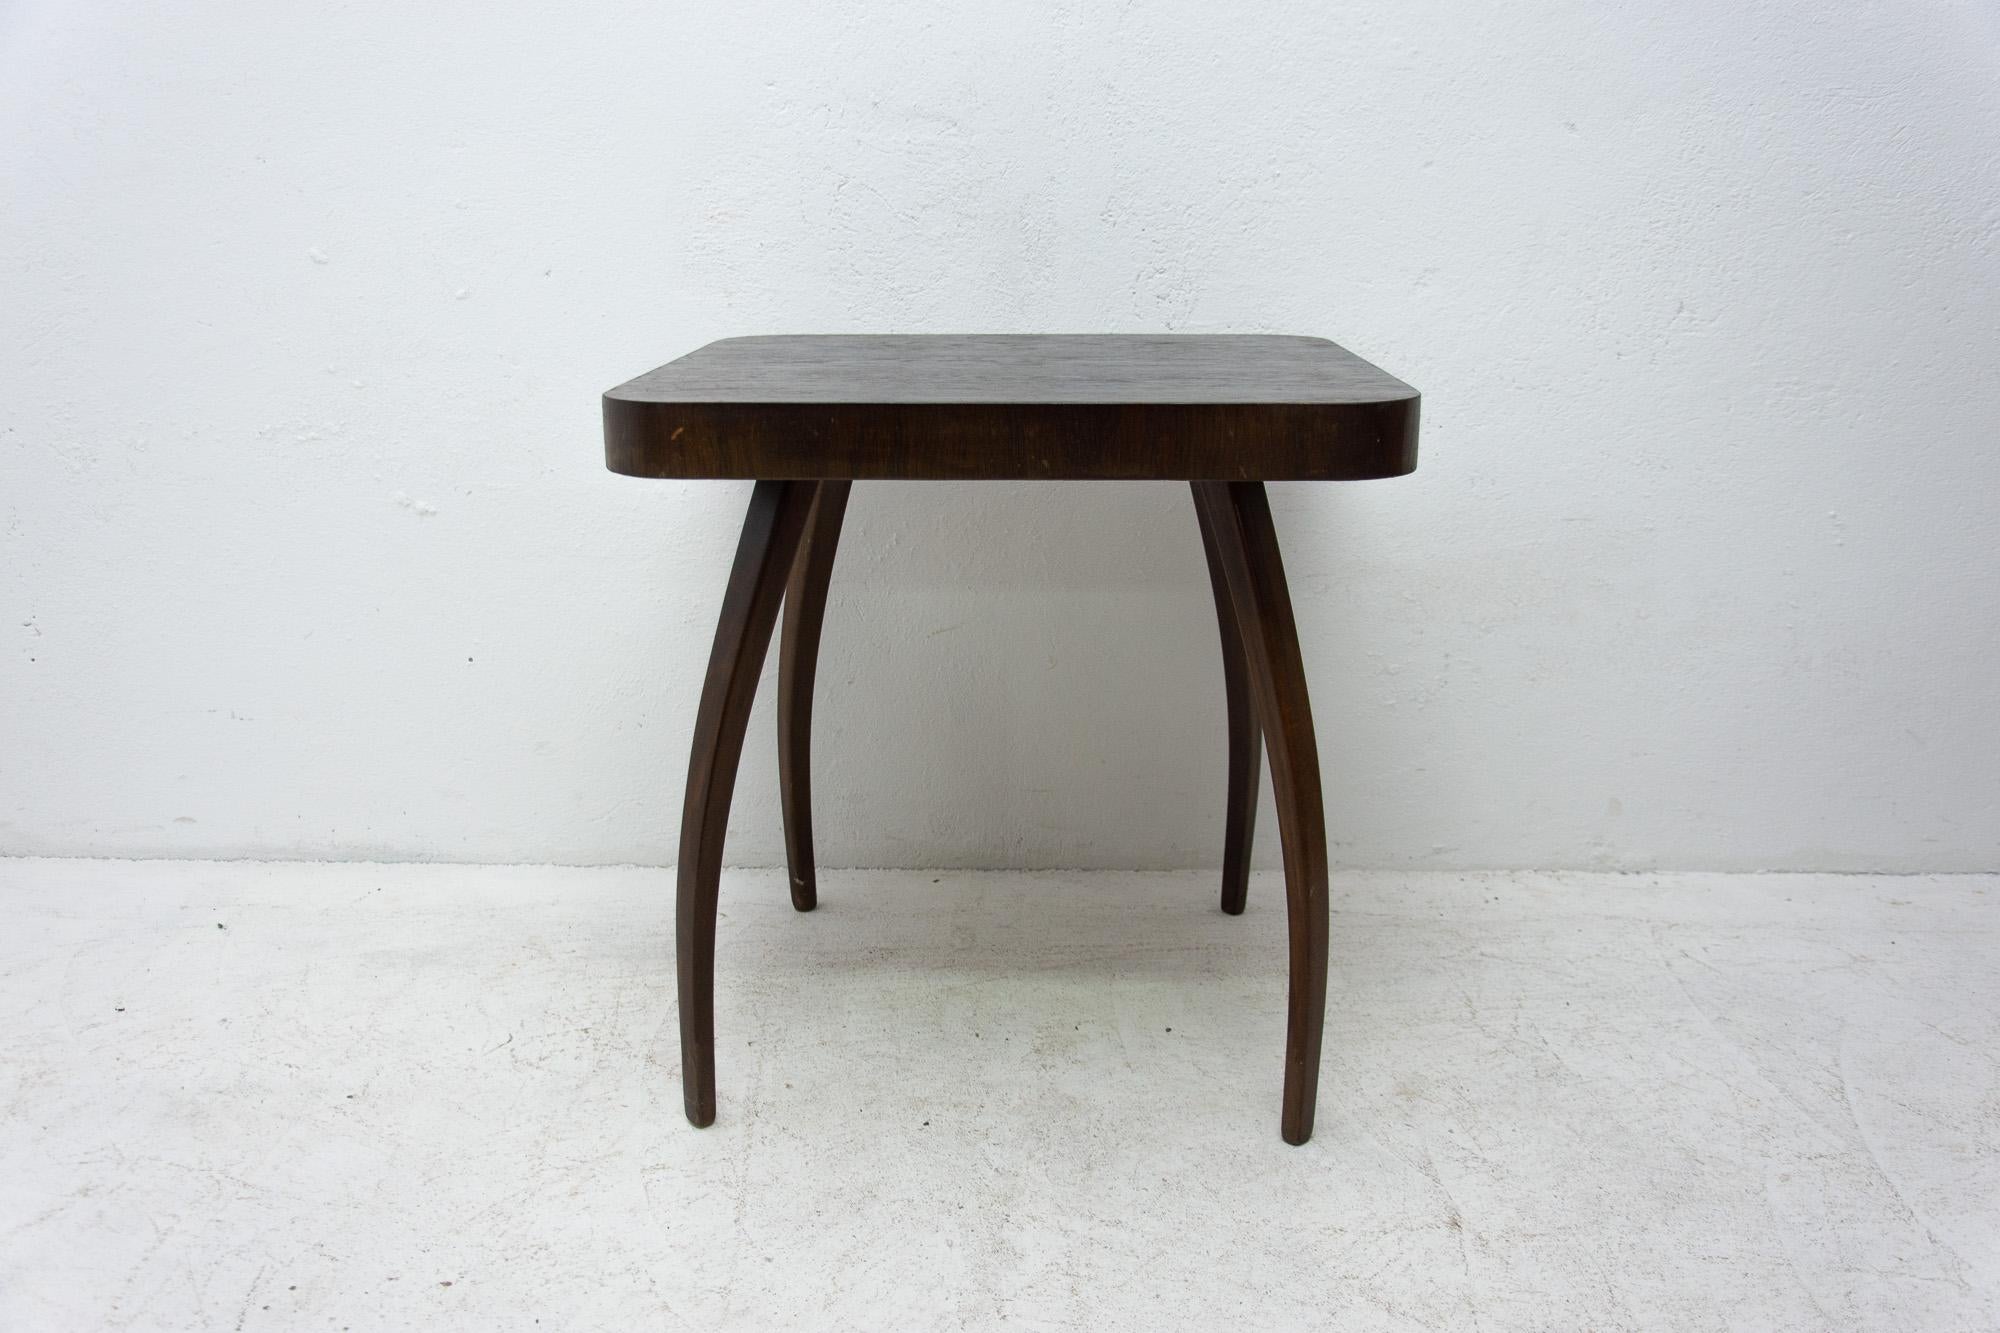 A Popular square coffee table in the shape of spider designed by Jindrich Halabala circa 1930s, with distinctive curved legs, rounded corners. Stained oak. In good original vintage condition, shows signs of age and using.